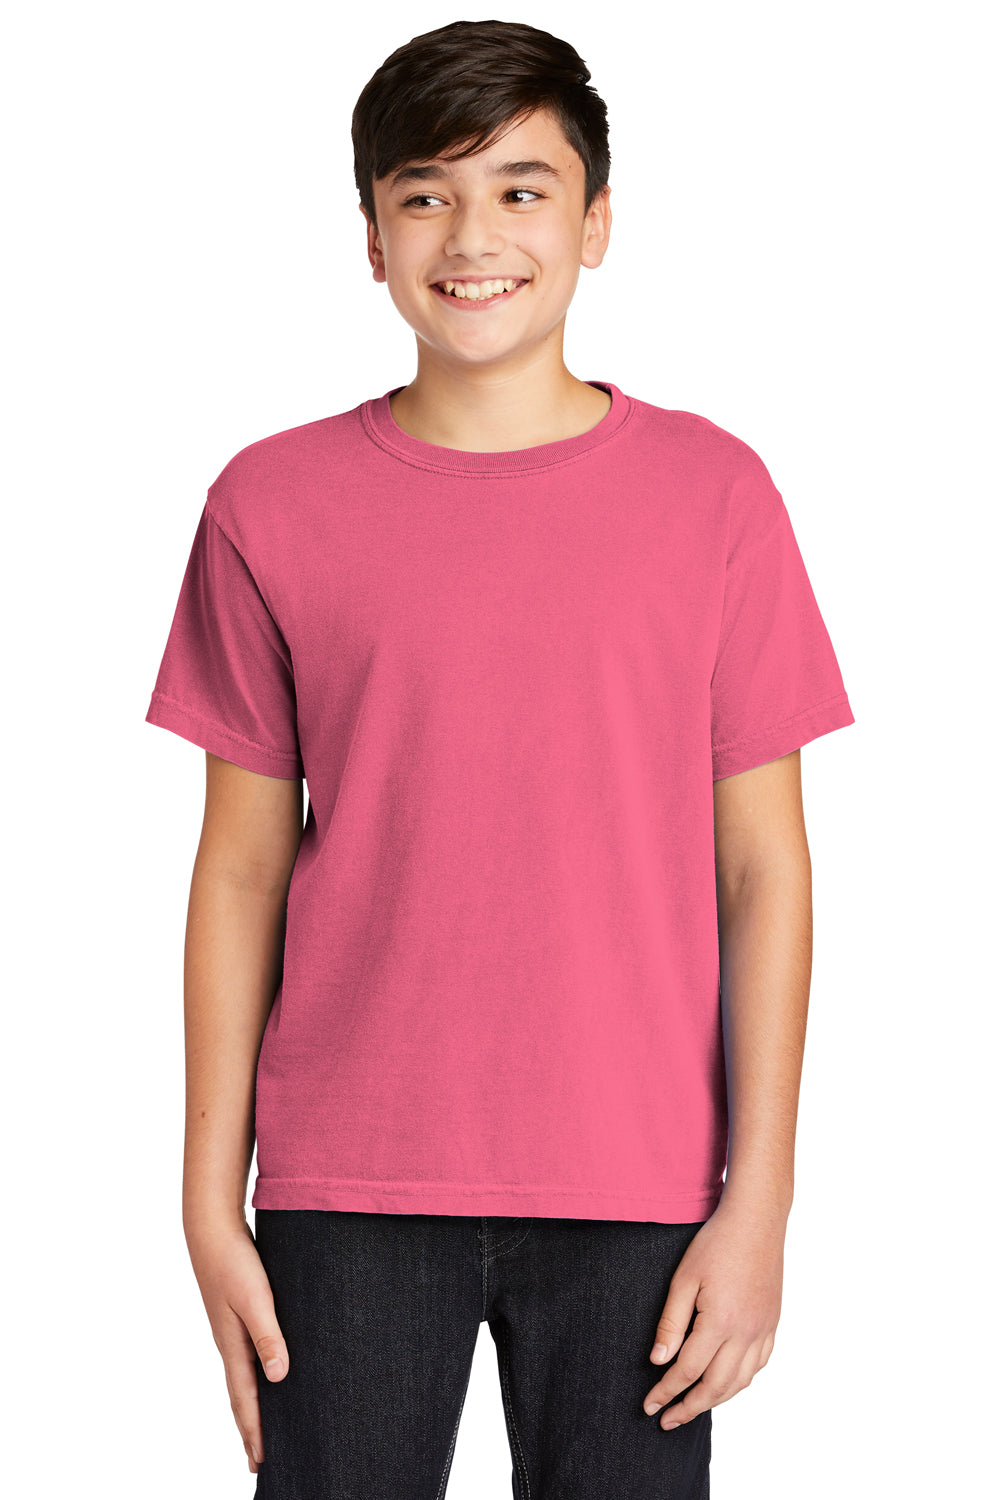 Comfort Colors C9018 Youth Short Sleeve Crewneck T-Shirt Crunchberry Pink Front